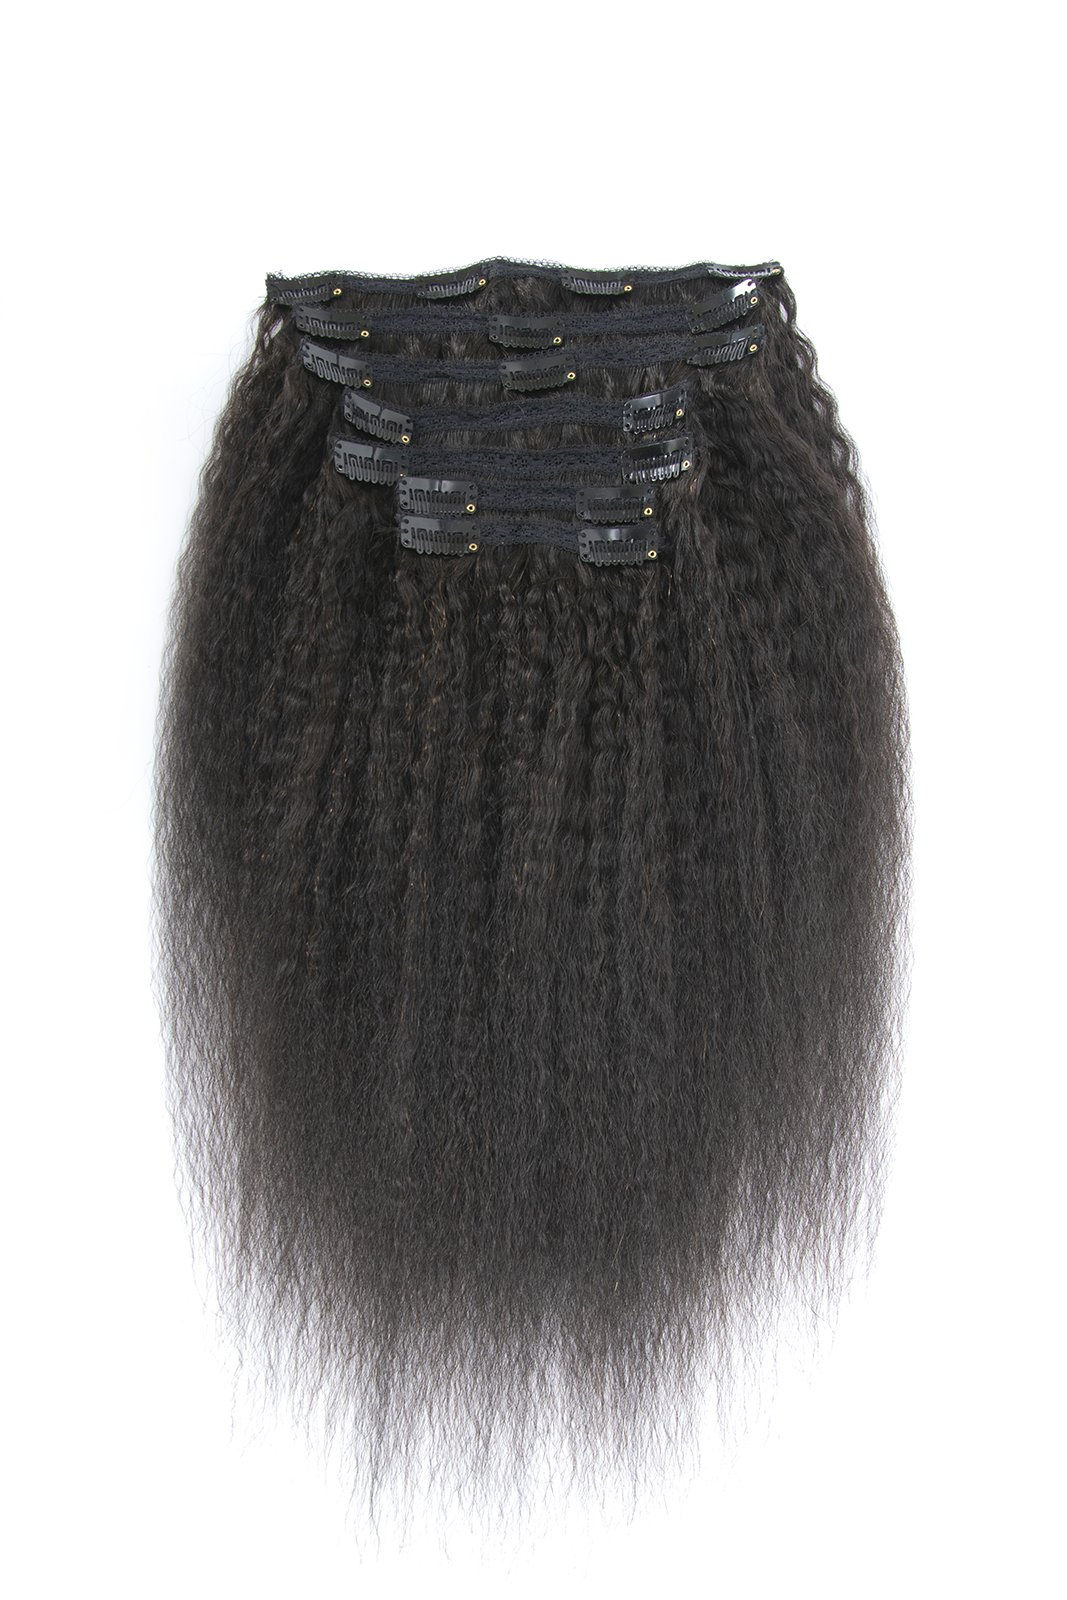 Jada Cambodian Kinky Straight - Traditional Weft Clip In Bundles